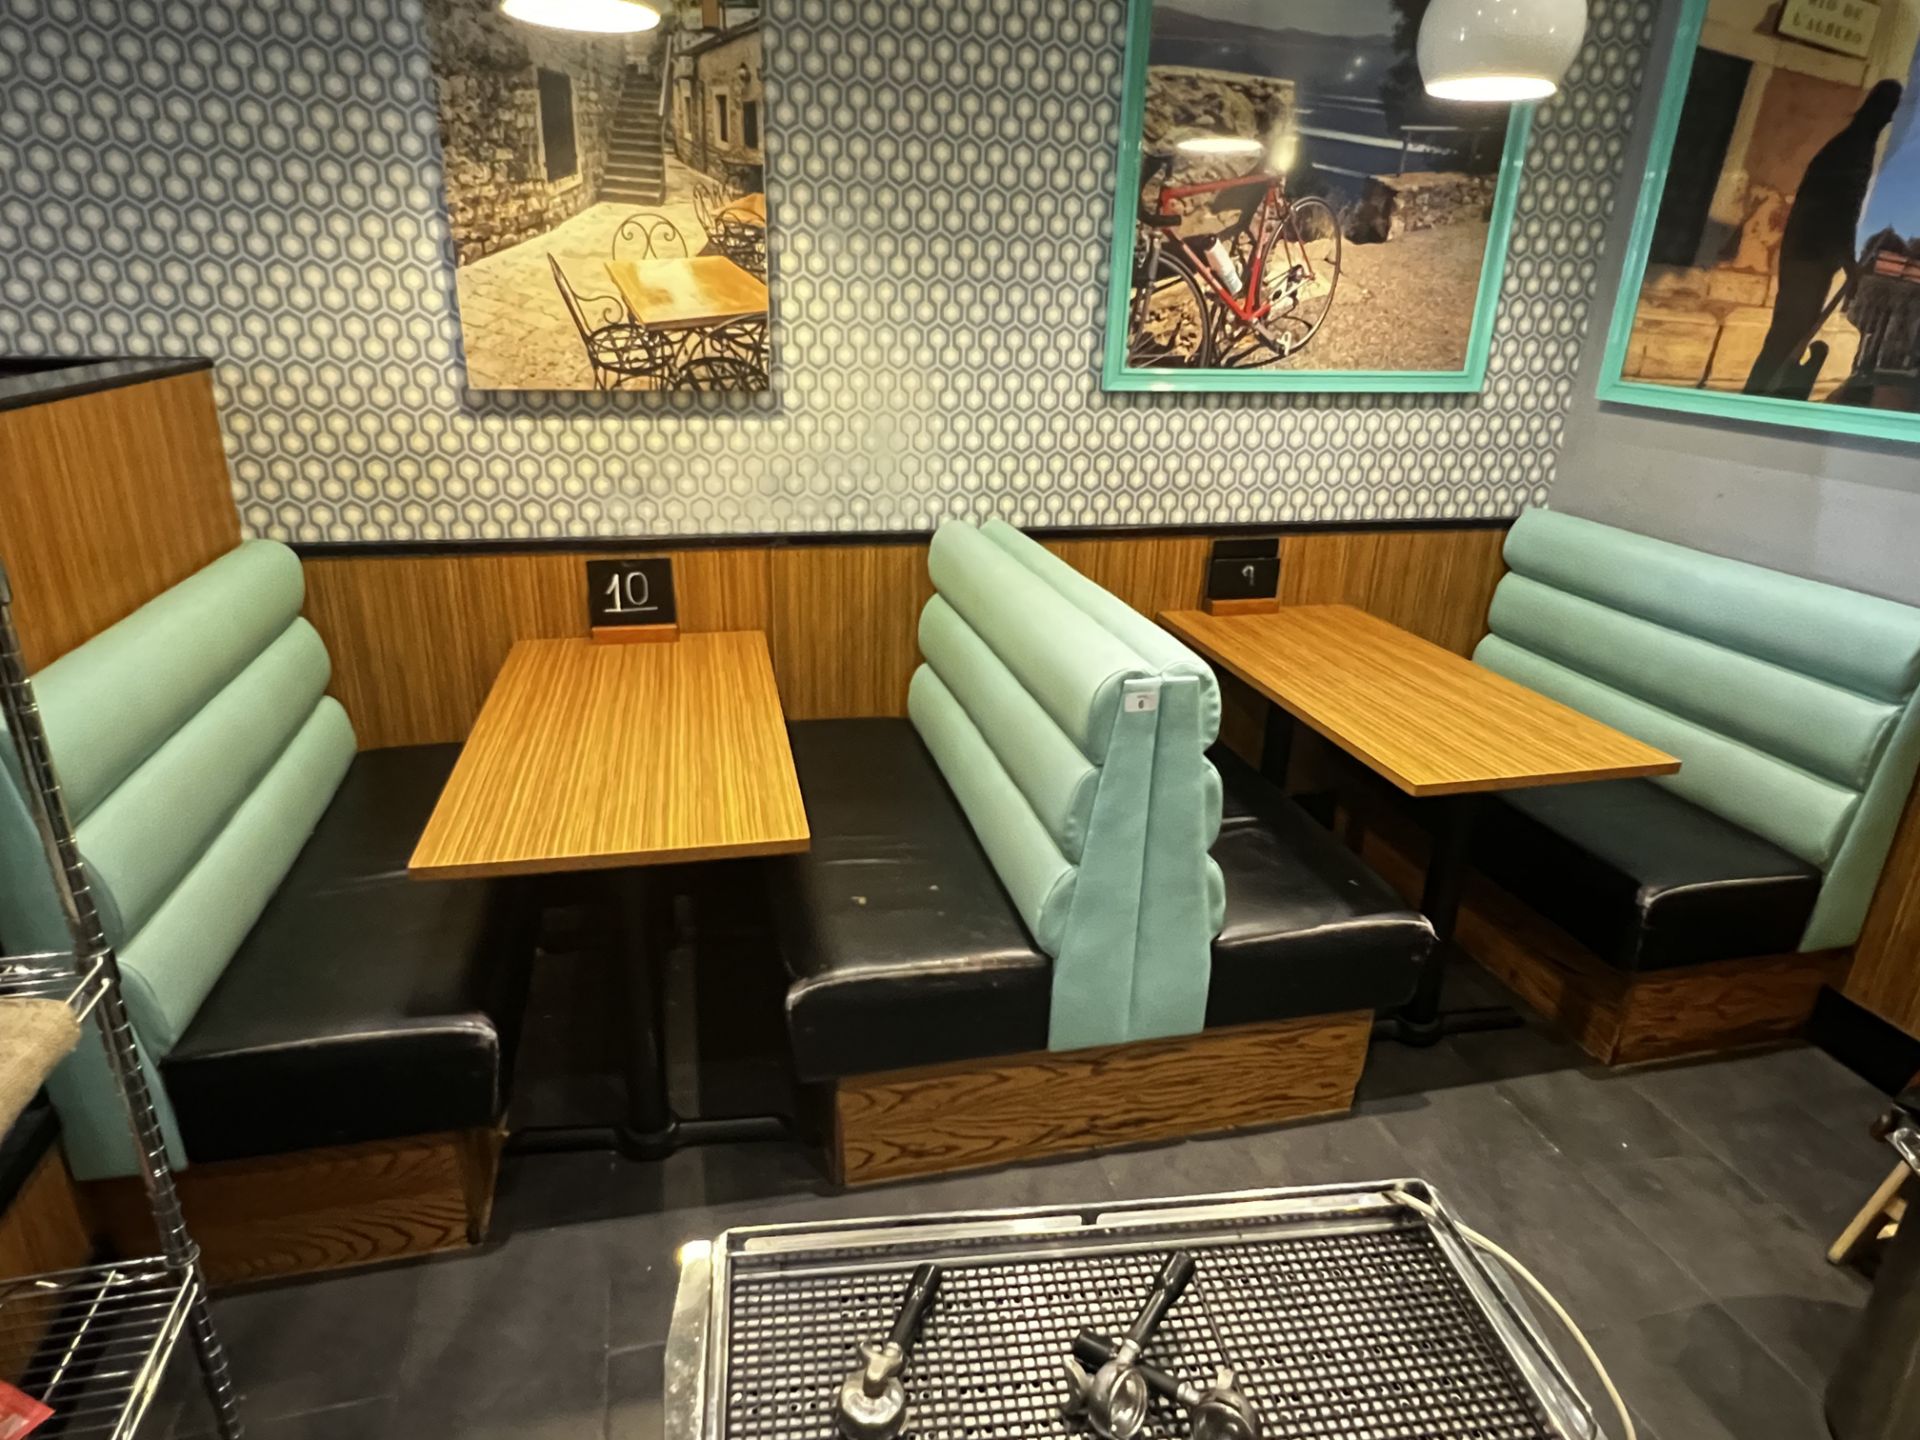 4 x Upholstered bench seats with 2 x tables 1.2M long